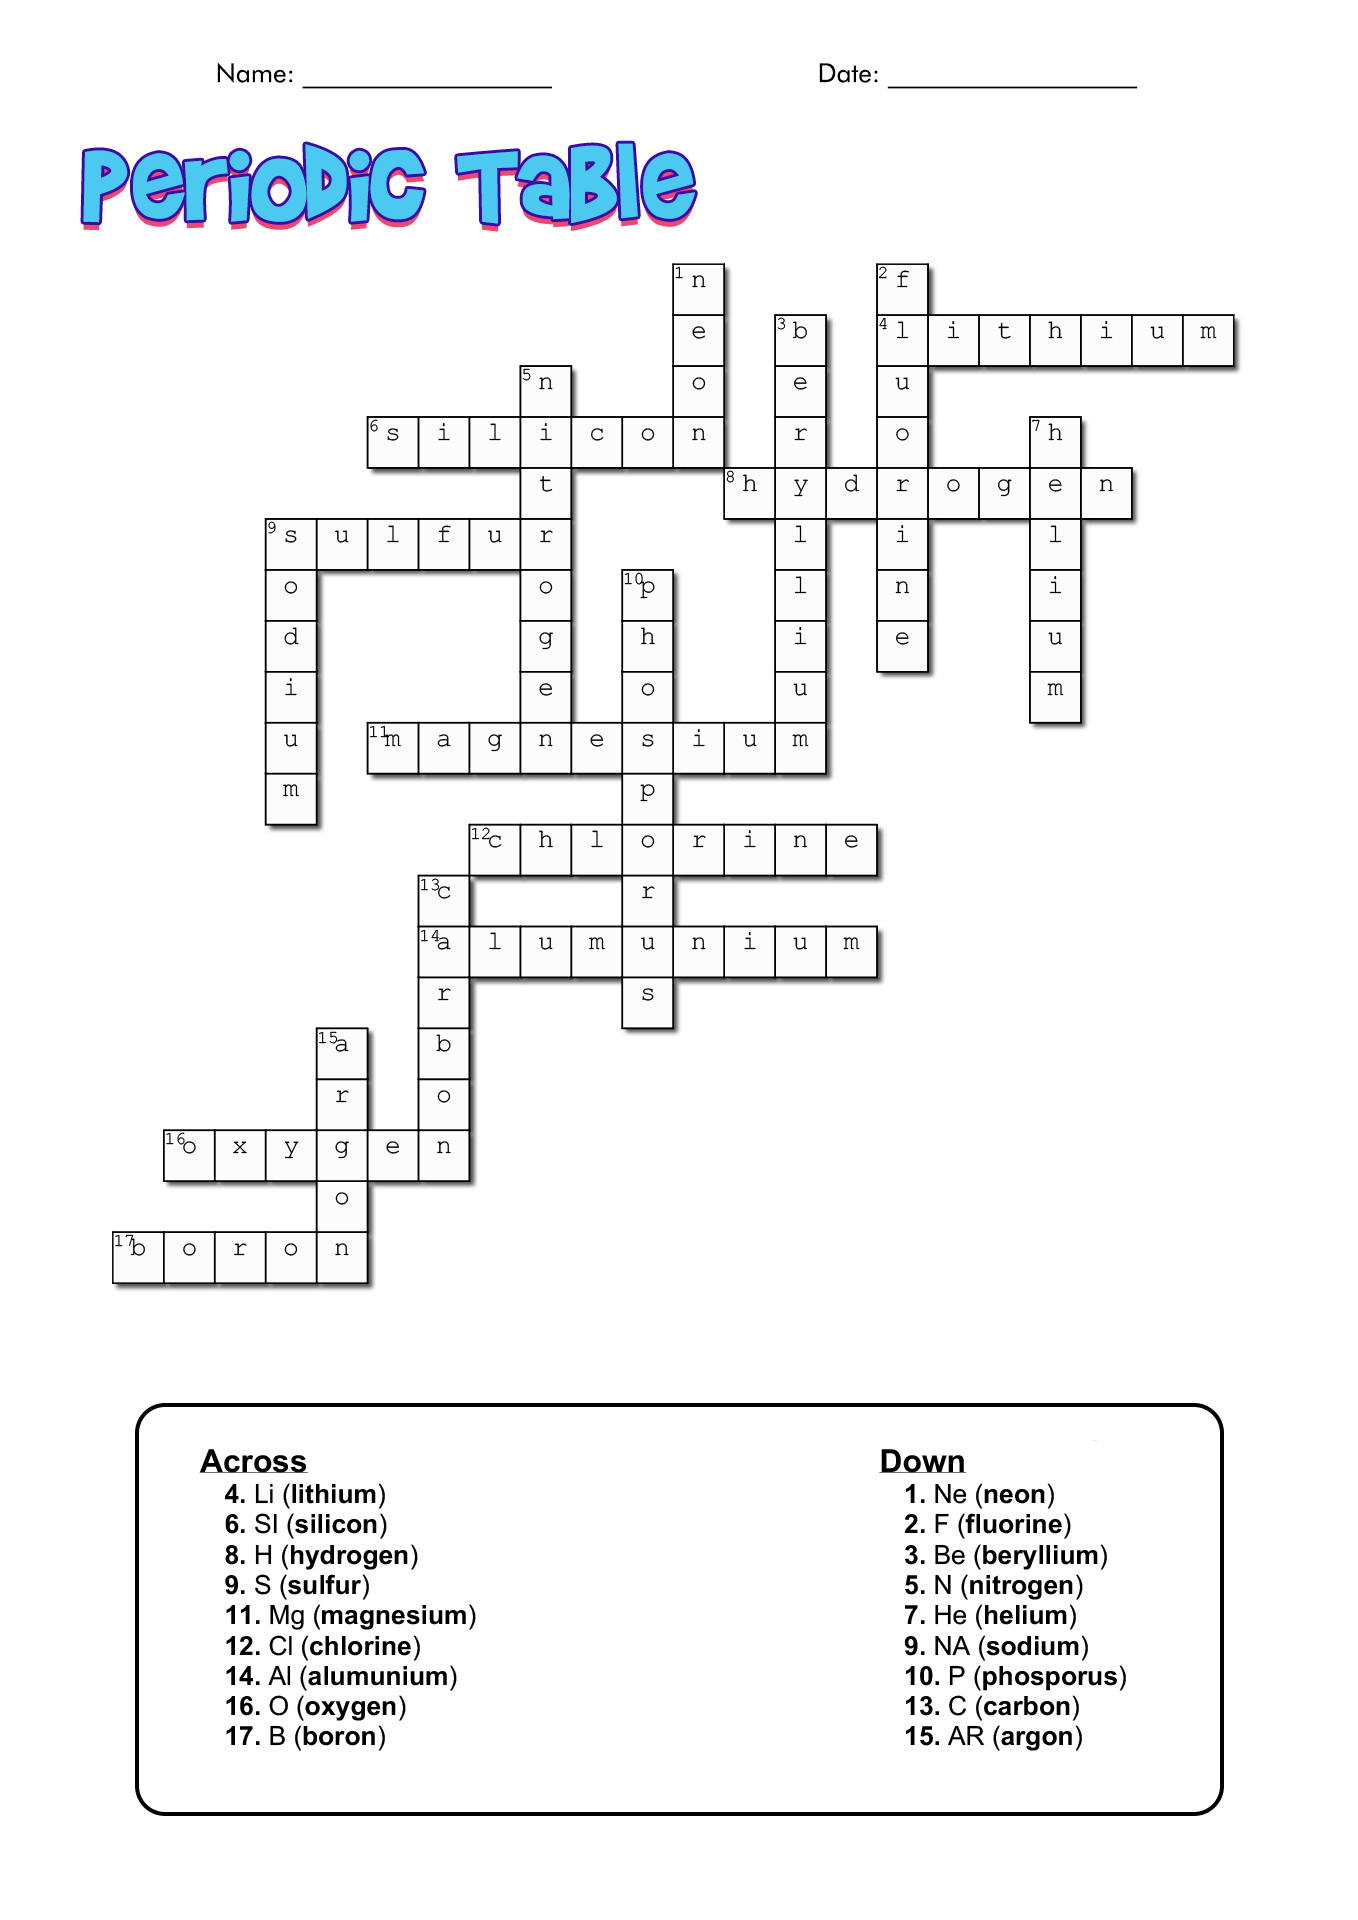 Periodic Table of Elements Crossword Puzzle Answer Image